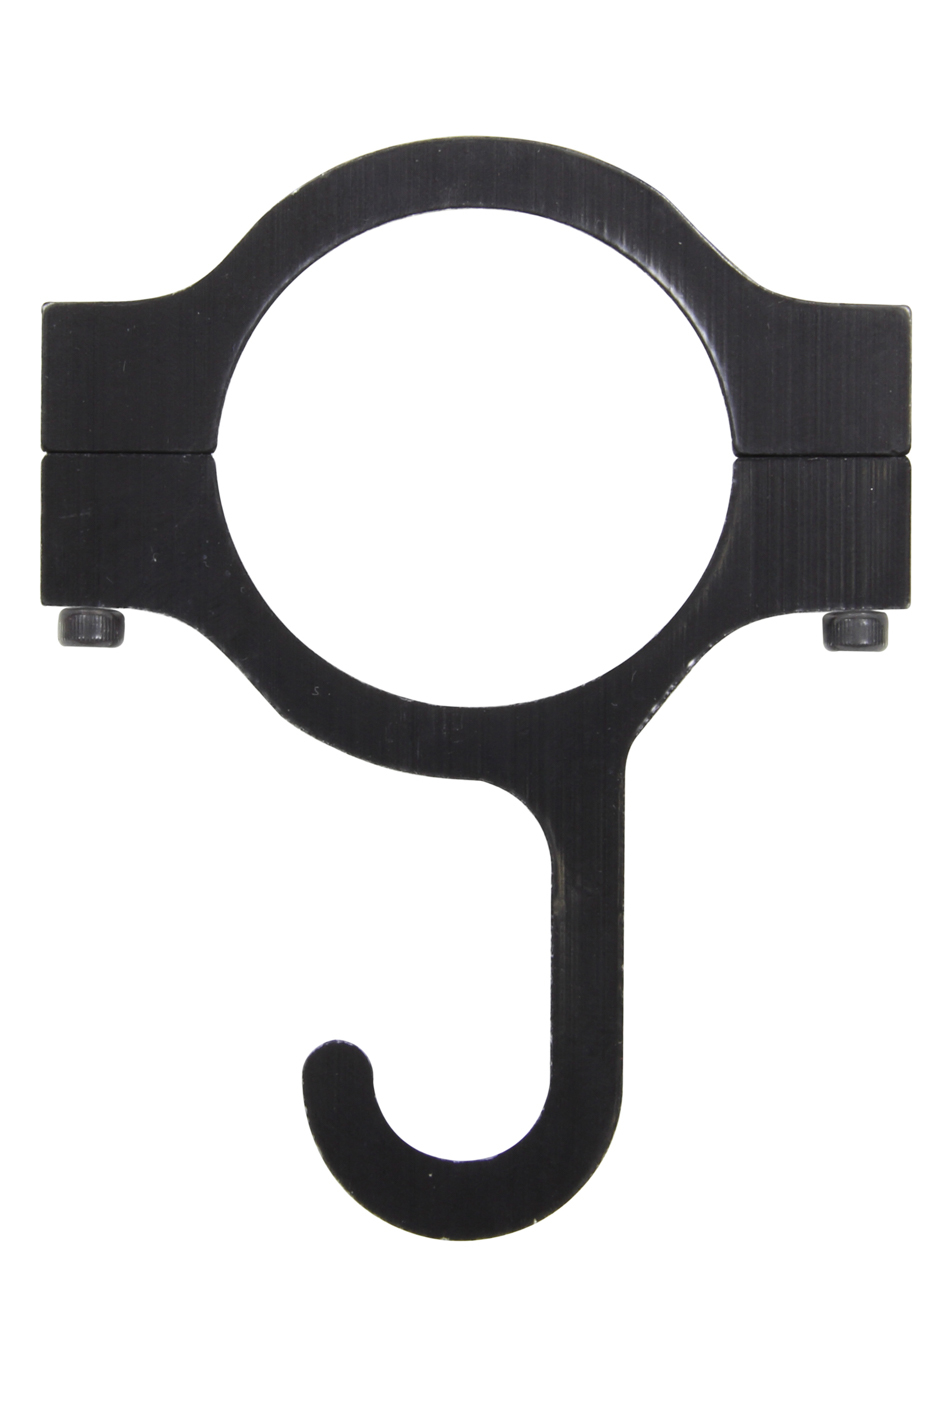 QuickCar 66-920 Helmet Hook, Clamp-On, Billet Aluminum, Black Anodized, 1-3/4 in OD Tube, Each